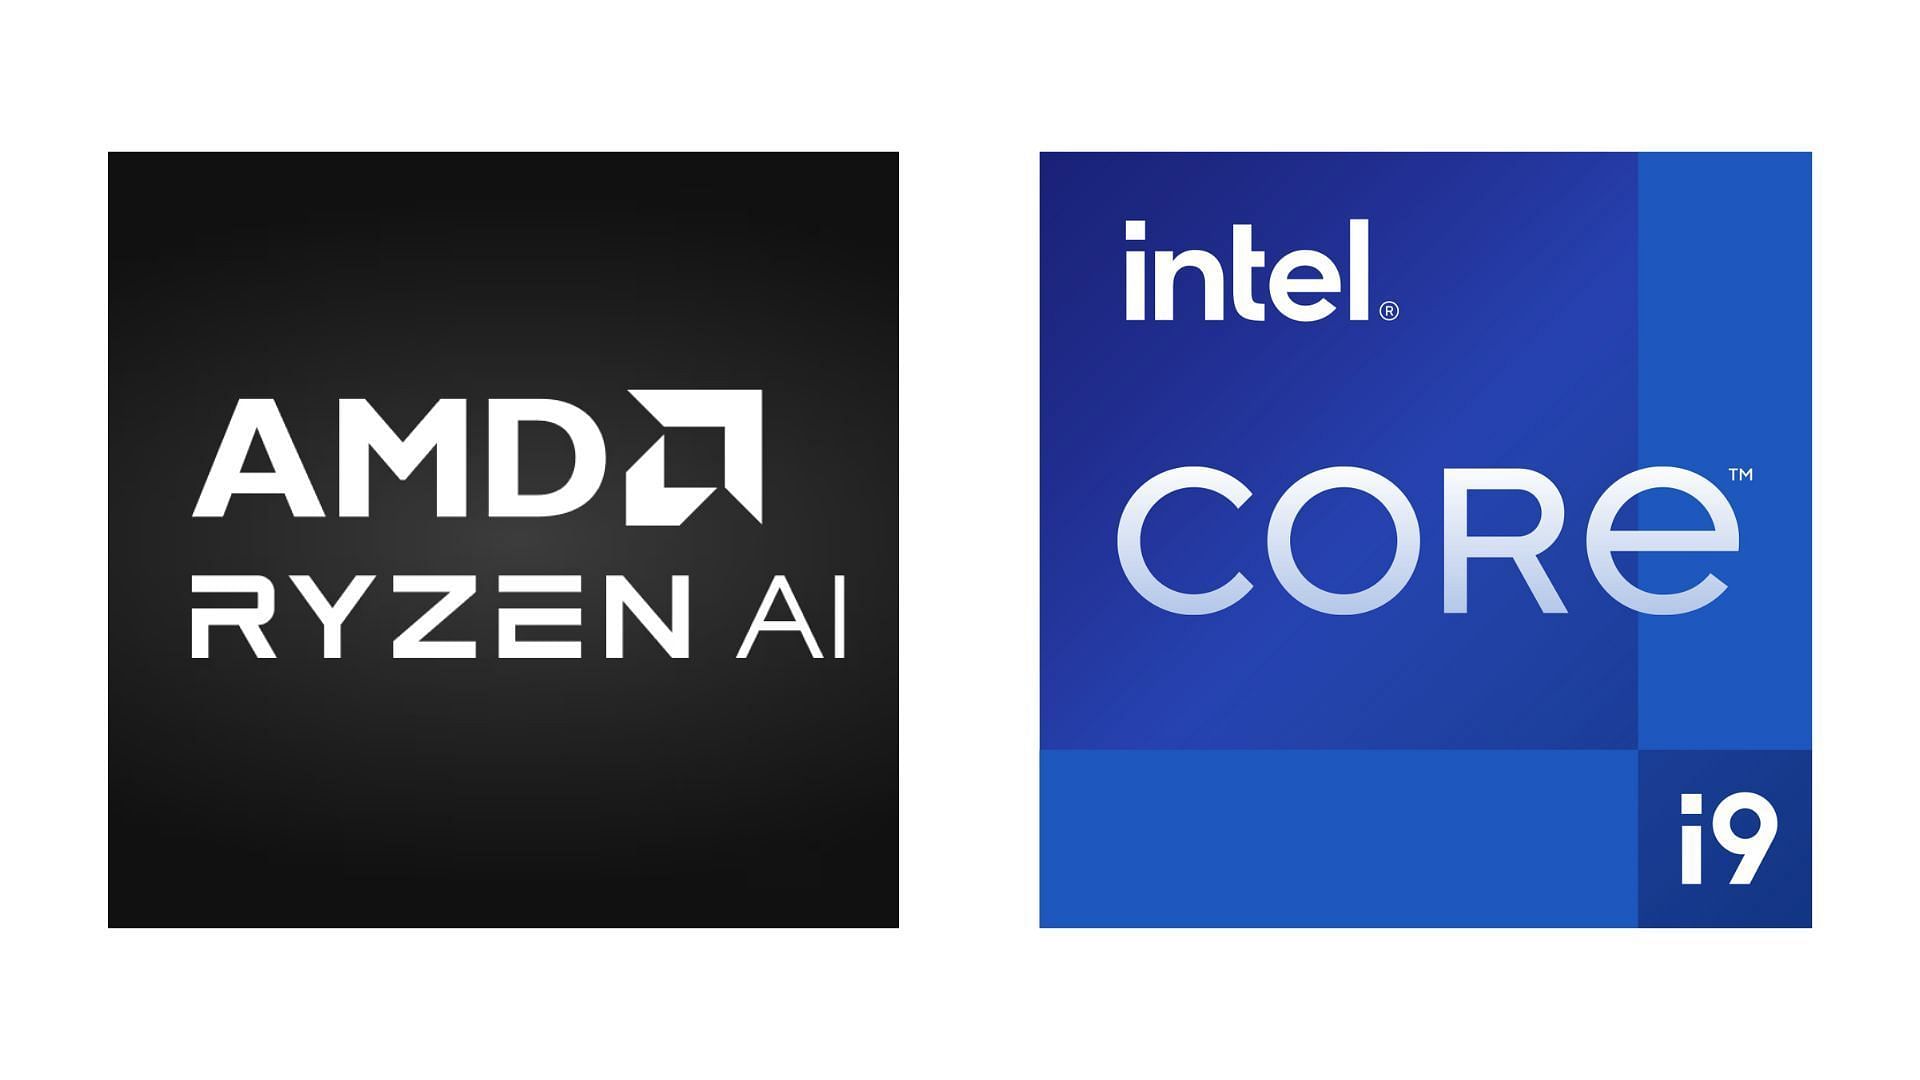 Both processors are quite similar in terms of performance (Image via AMD, Intel)